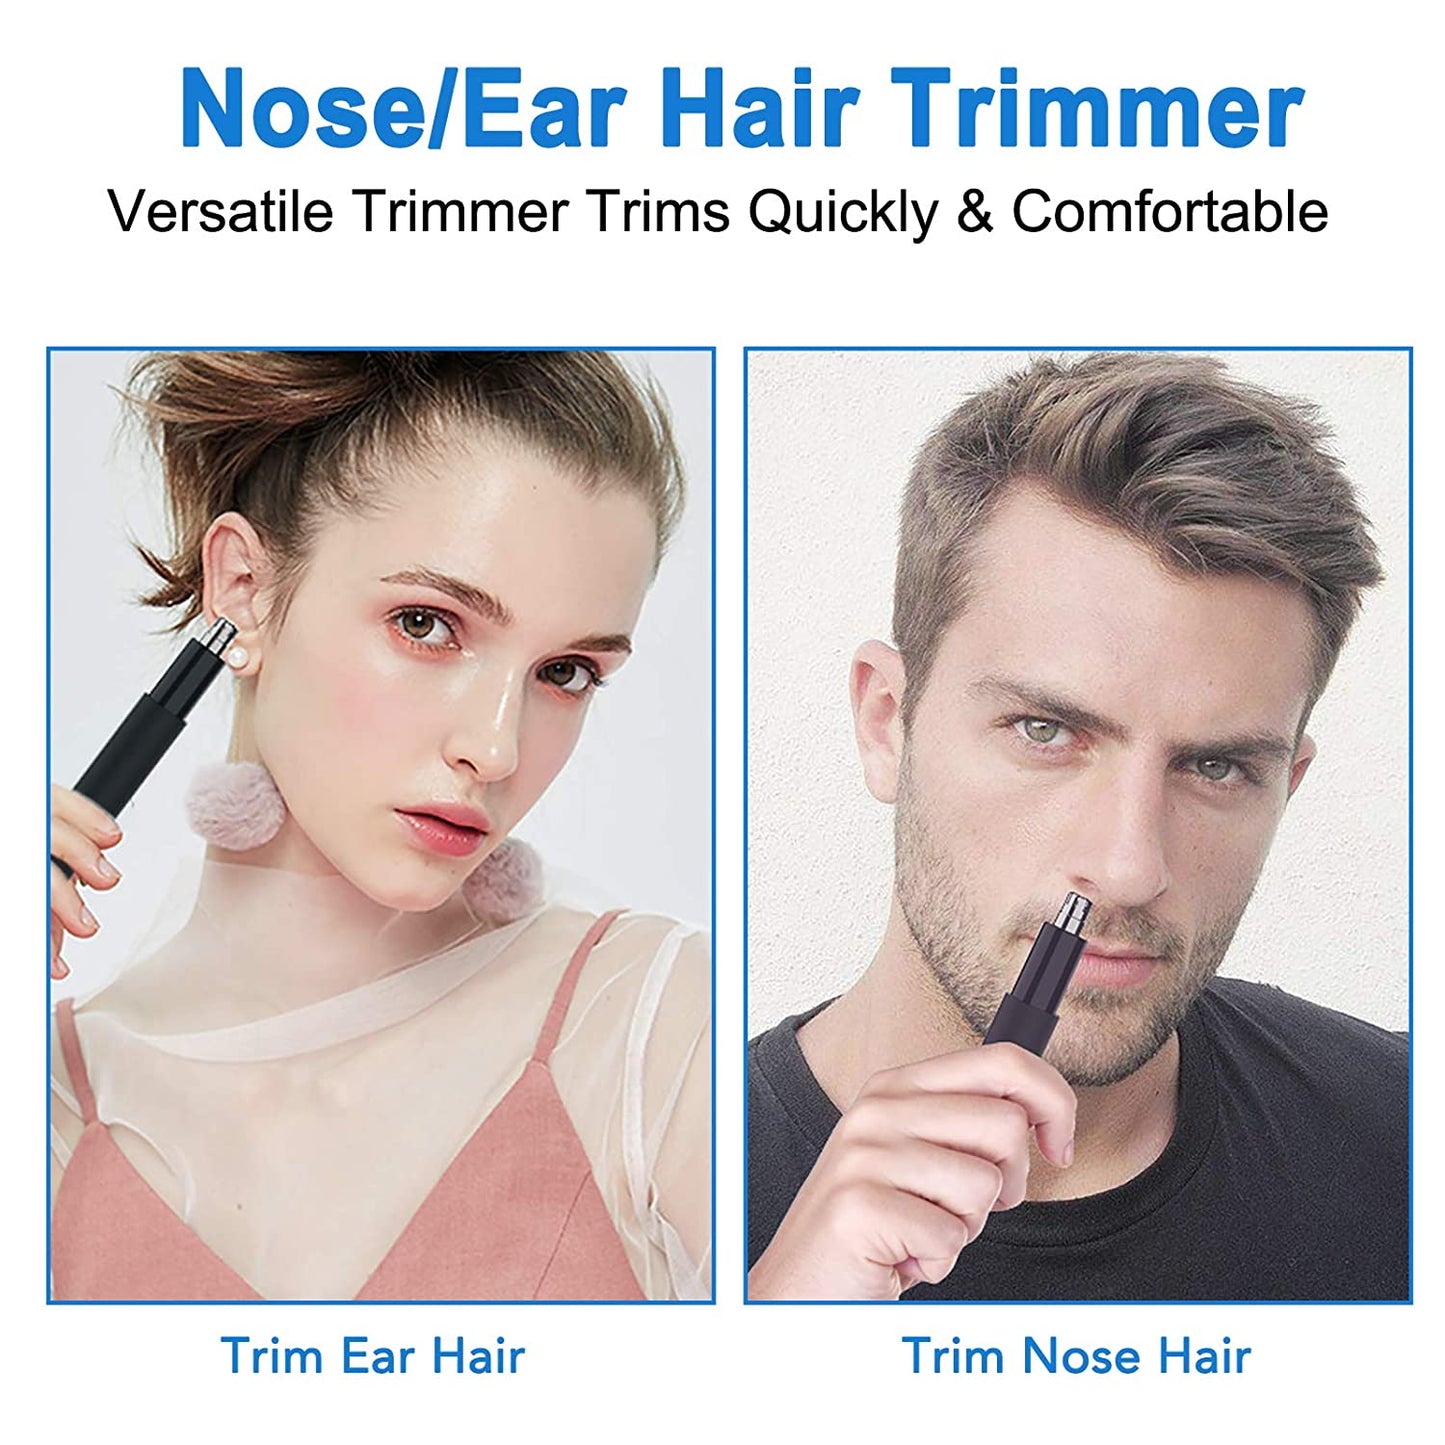 Ultimate Nose Ear Hair Trimmer - Precision Grooming, Compact & Travel-Friendly